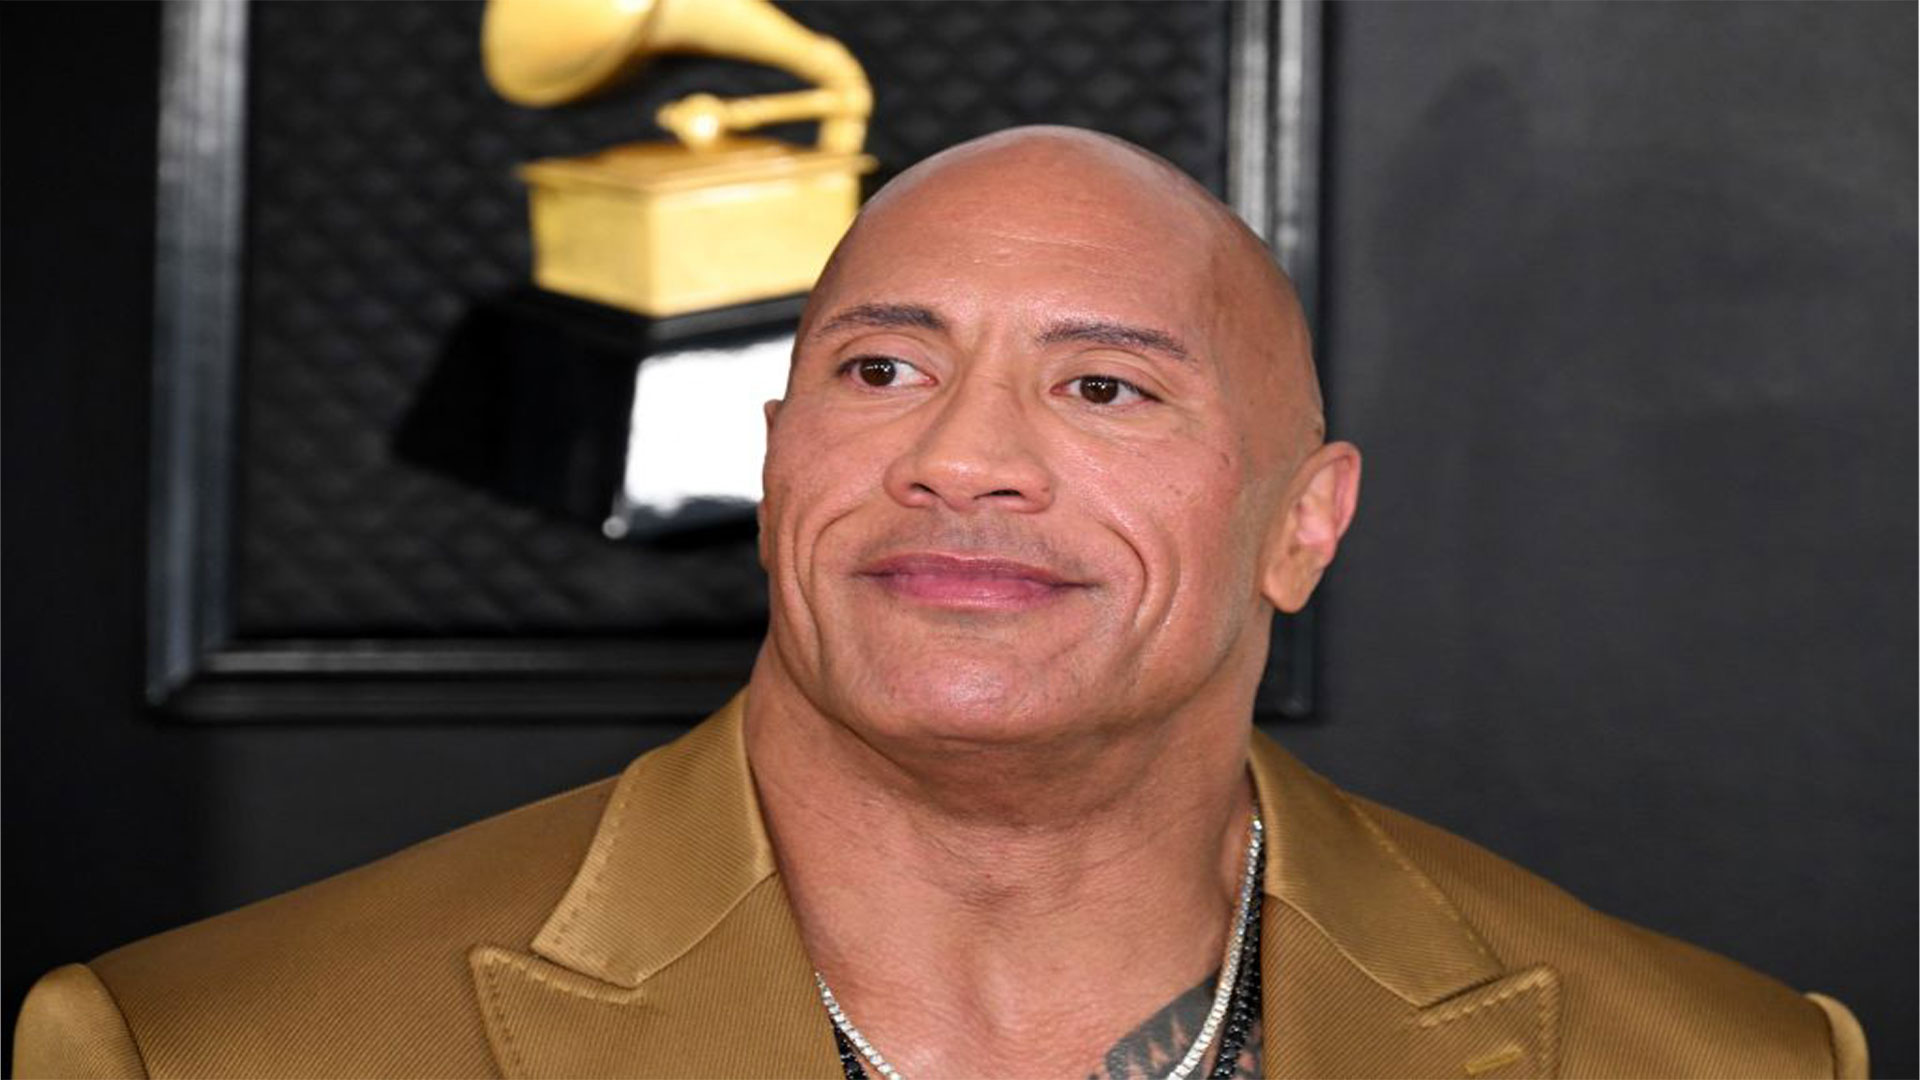 The Rock’s Wax Statue Sparks Controversy Over Skin Tone